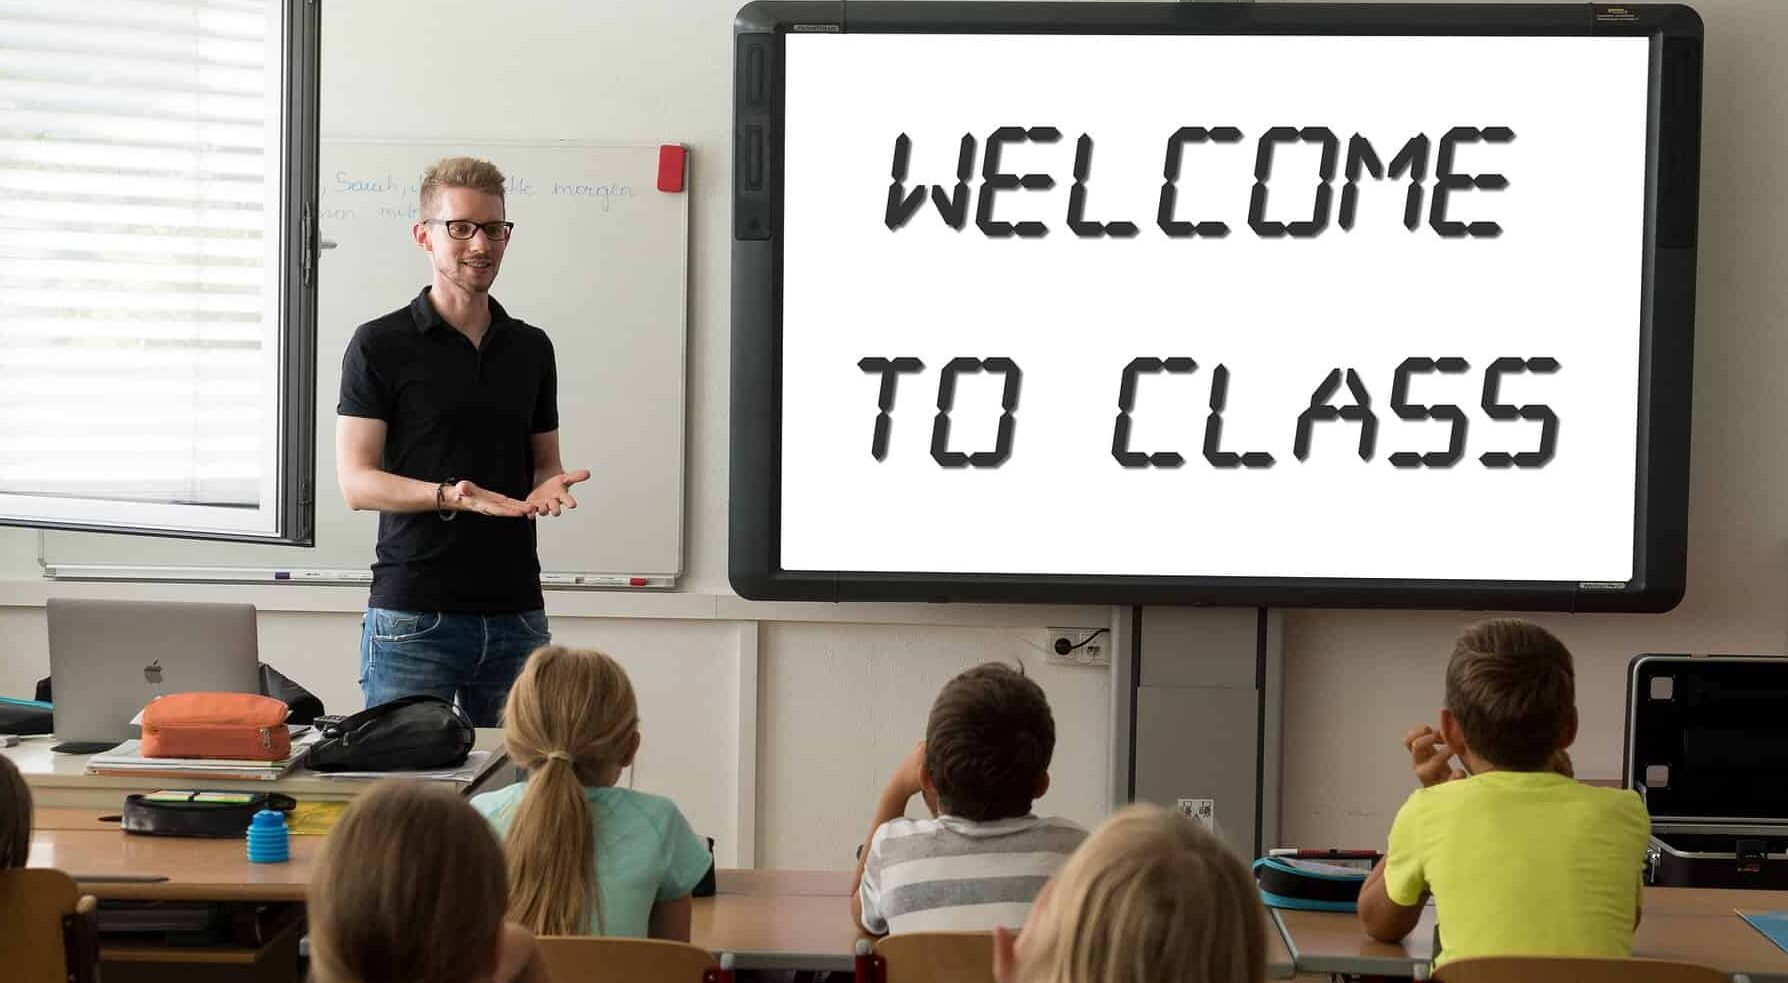 A male teacher stands at the front of a classroom of children with a sign saying "Welcome to Class".